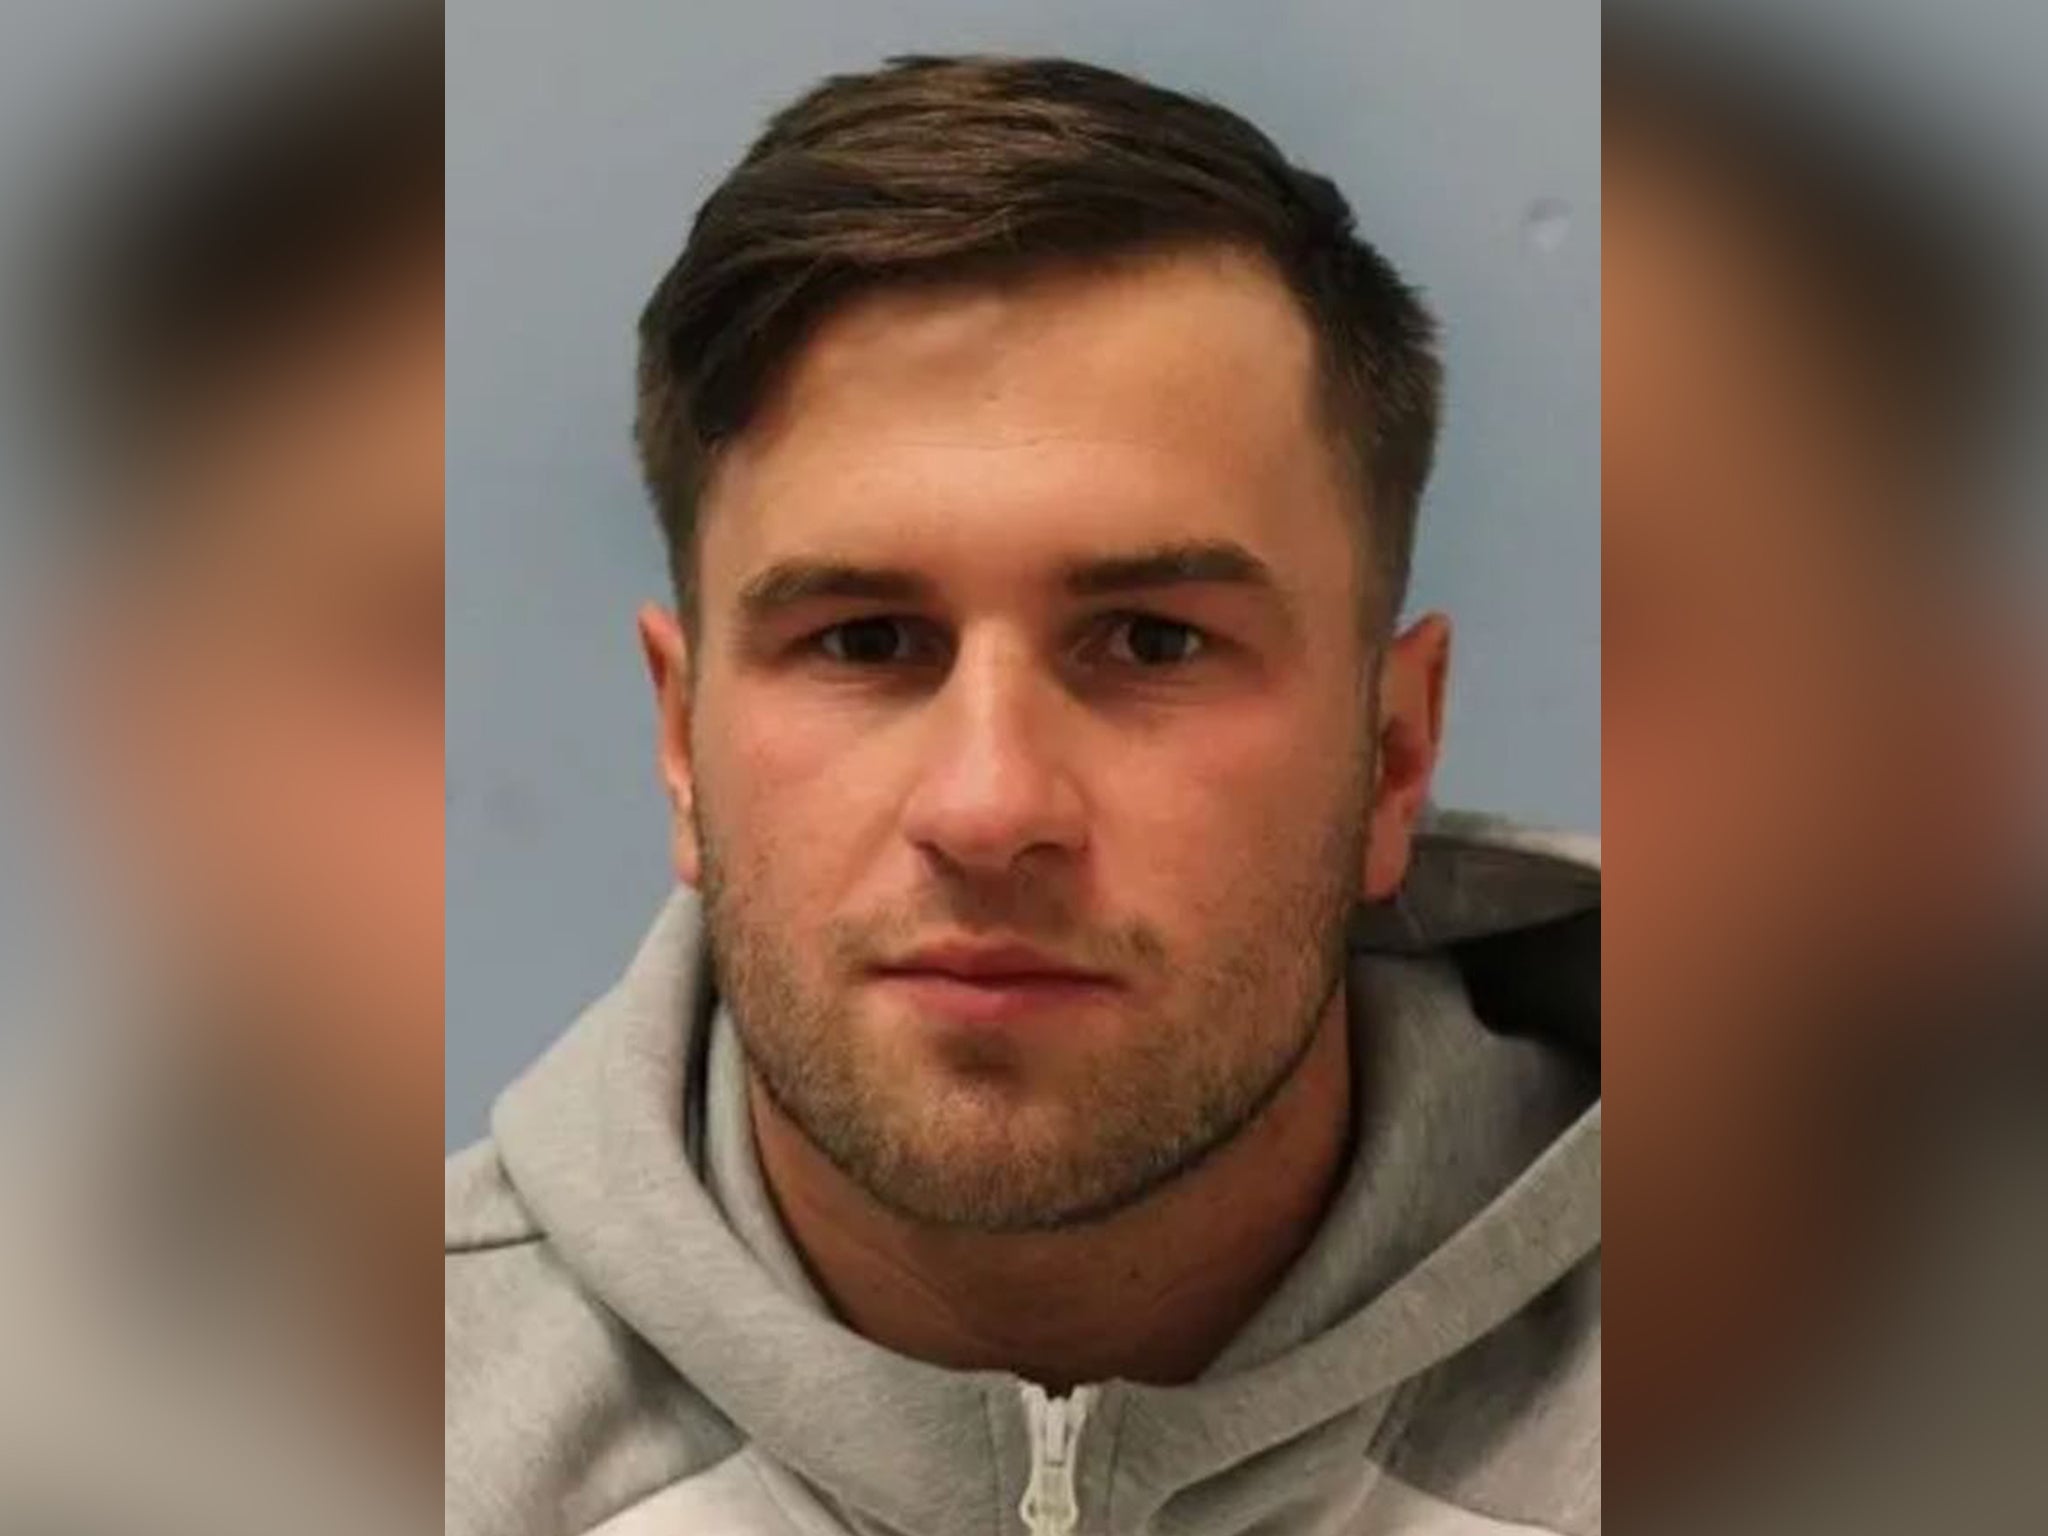 Martin Stokes, 25, has been jailed for five years